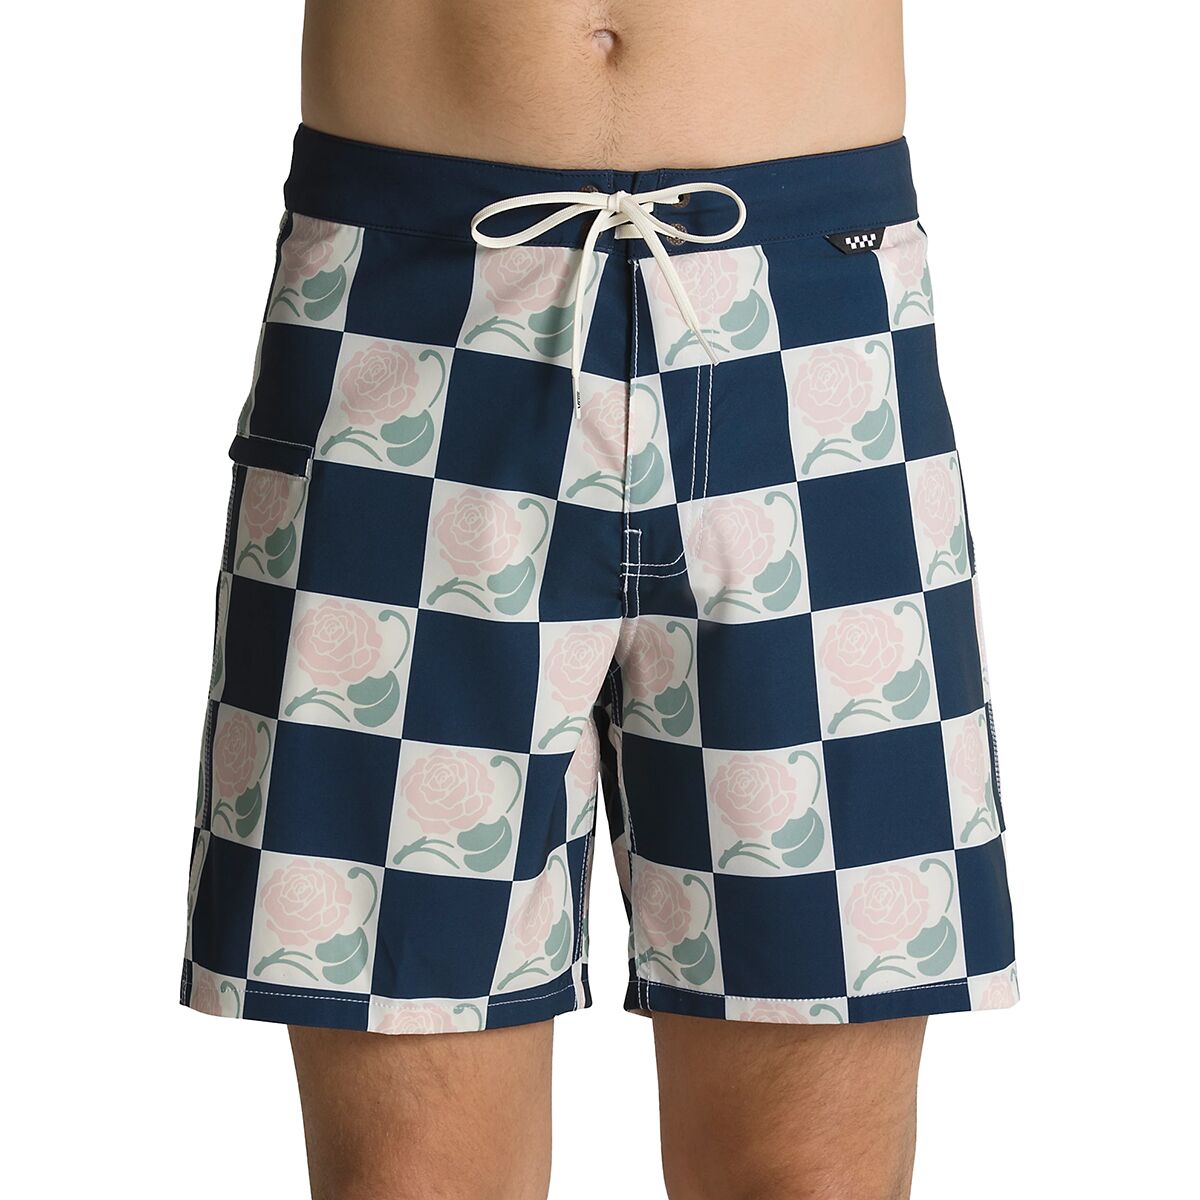 Vans The Daily Check 17in Board Short - Men's